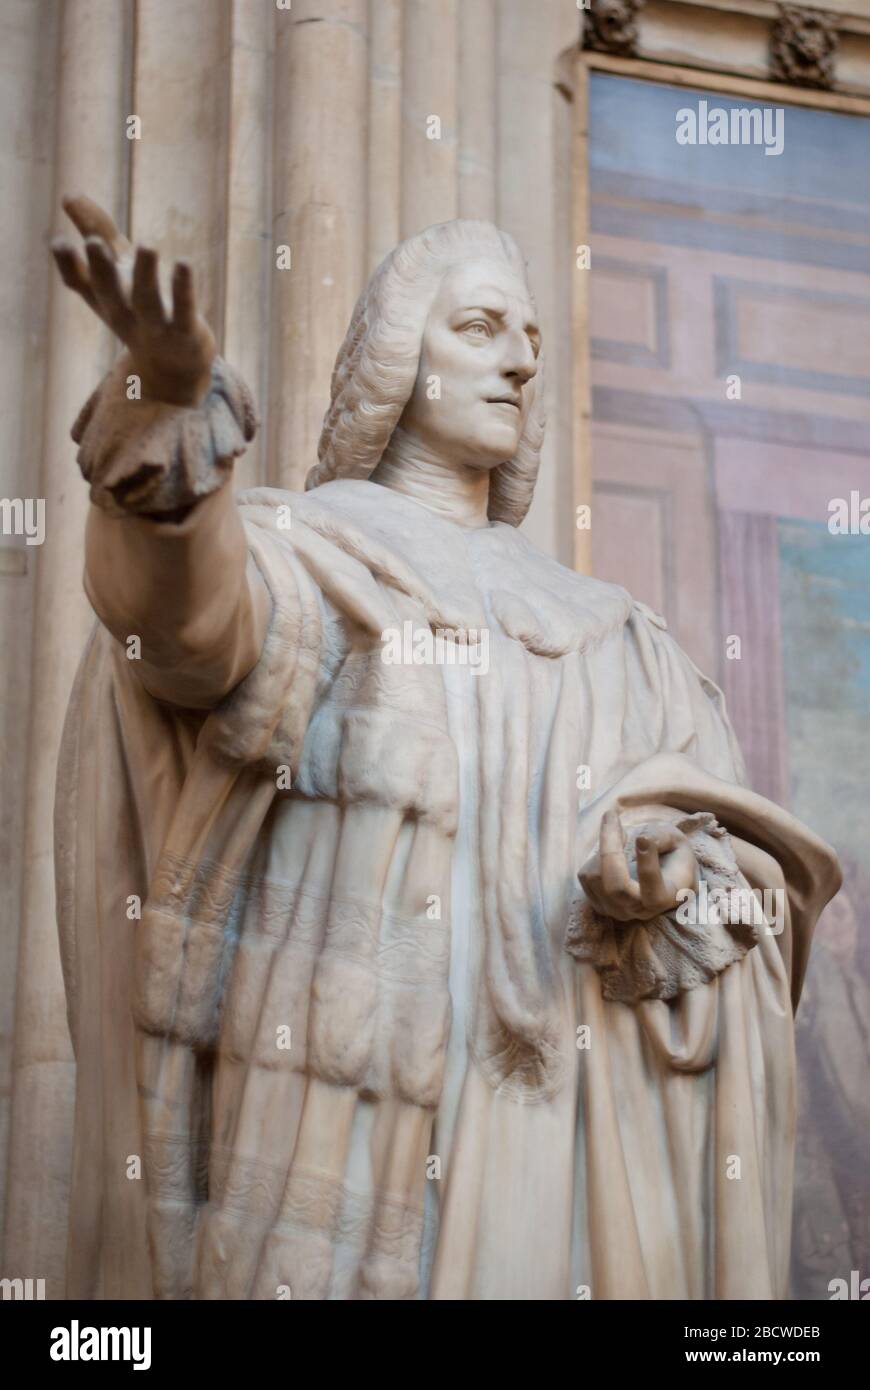 William Pitt 1. Earl of Chatham Marble Statue Westminster Hall, Palace of Westminster, London SW1 Stockfoto